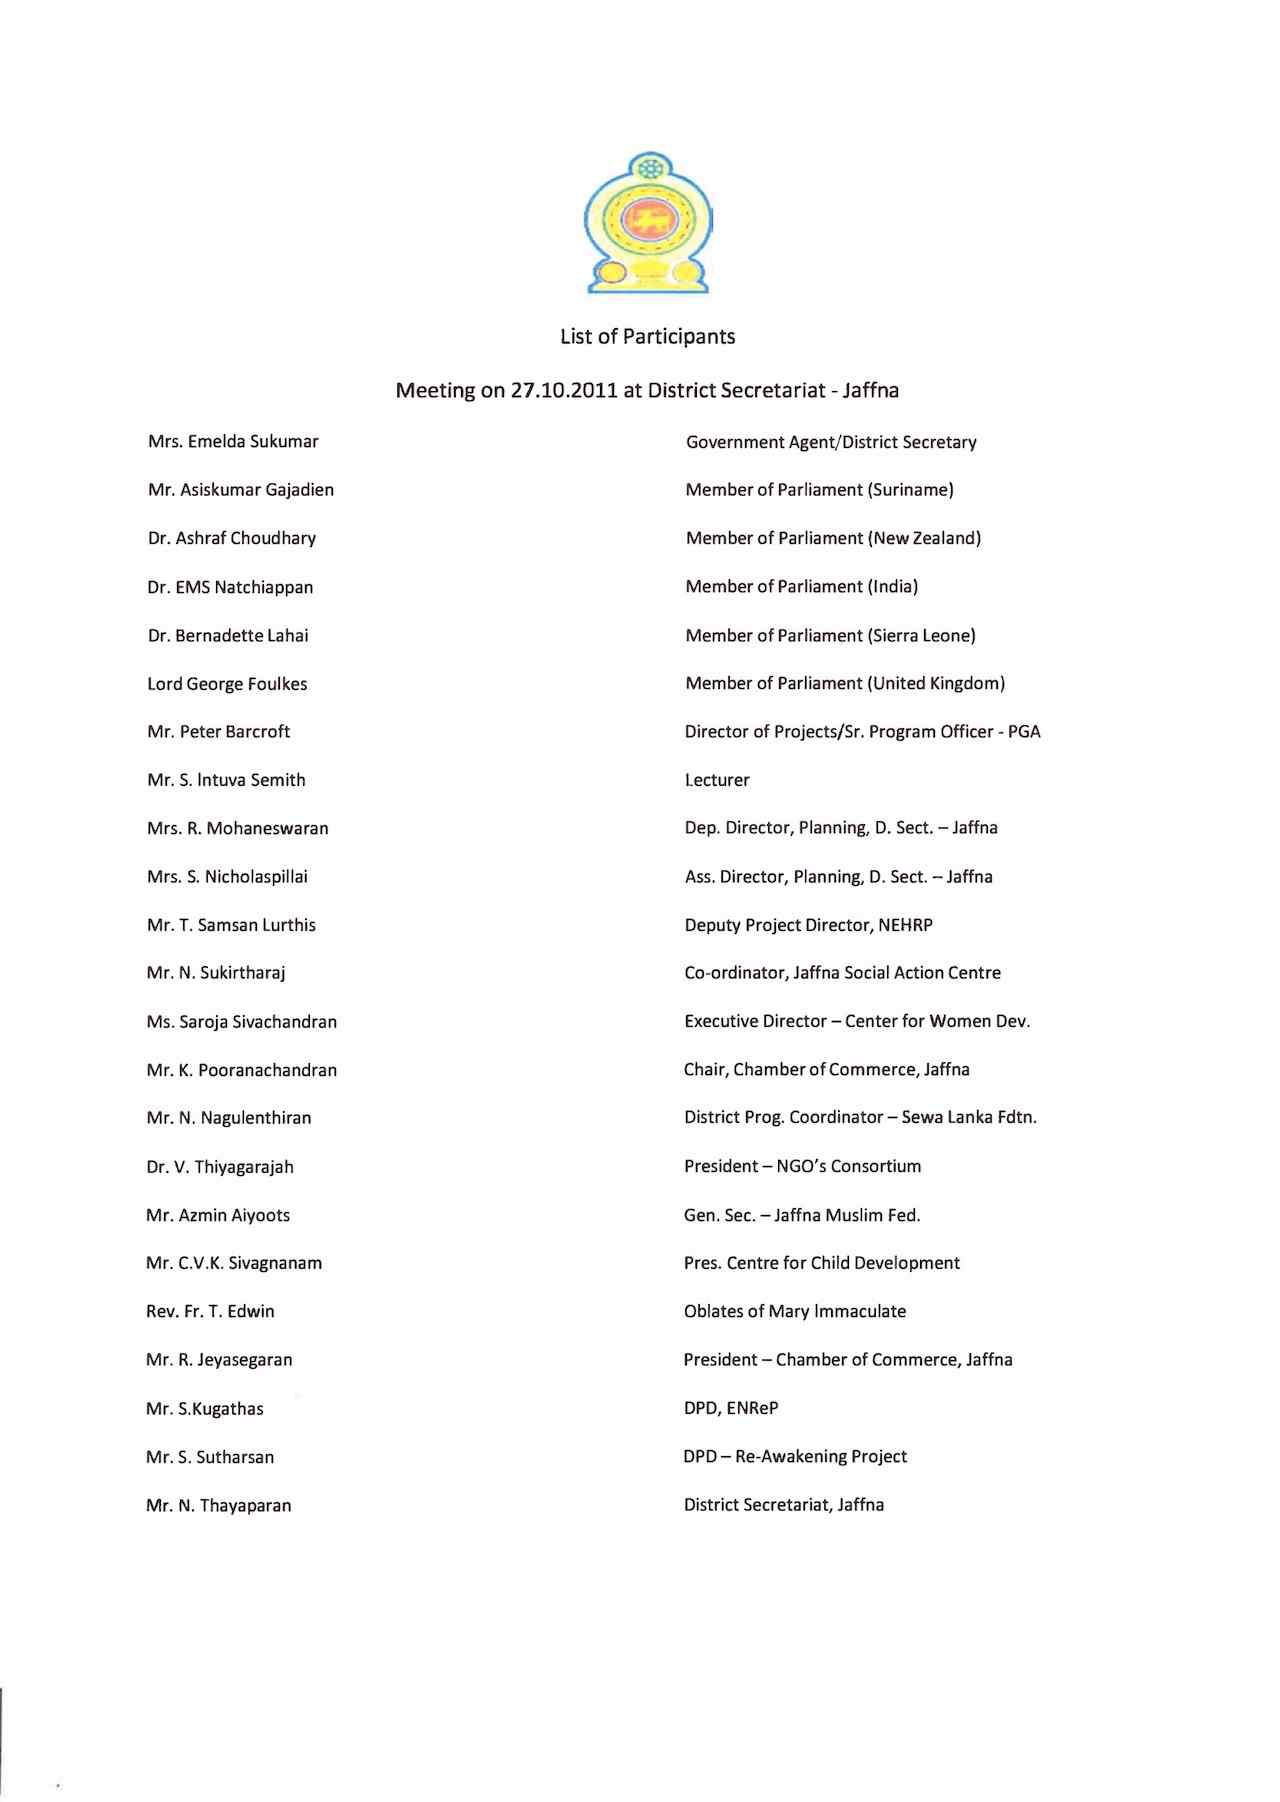 List of Participants: PGA Delegation Fact-Finding Field Excursion to Northern Sri Lanka (Oct. 2011)